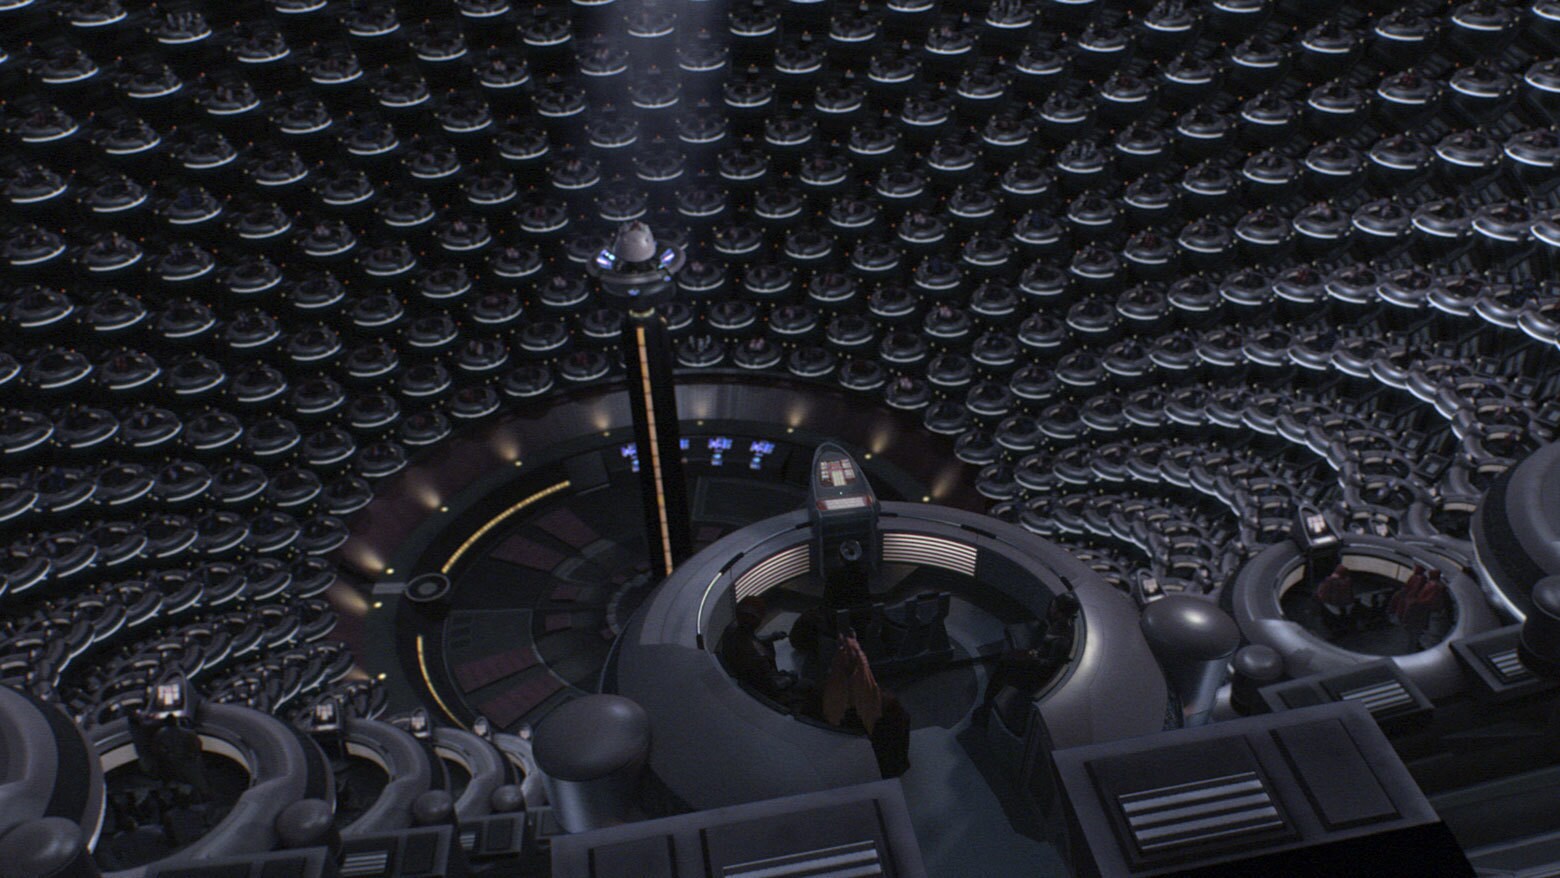 Star Wars Releases Official Background Images To Be Used On Video Calls